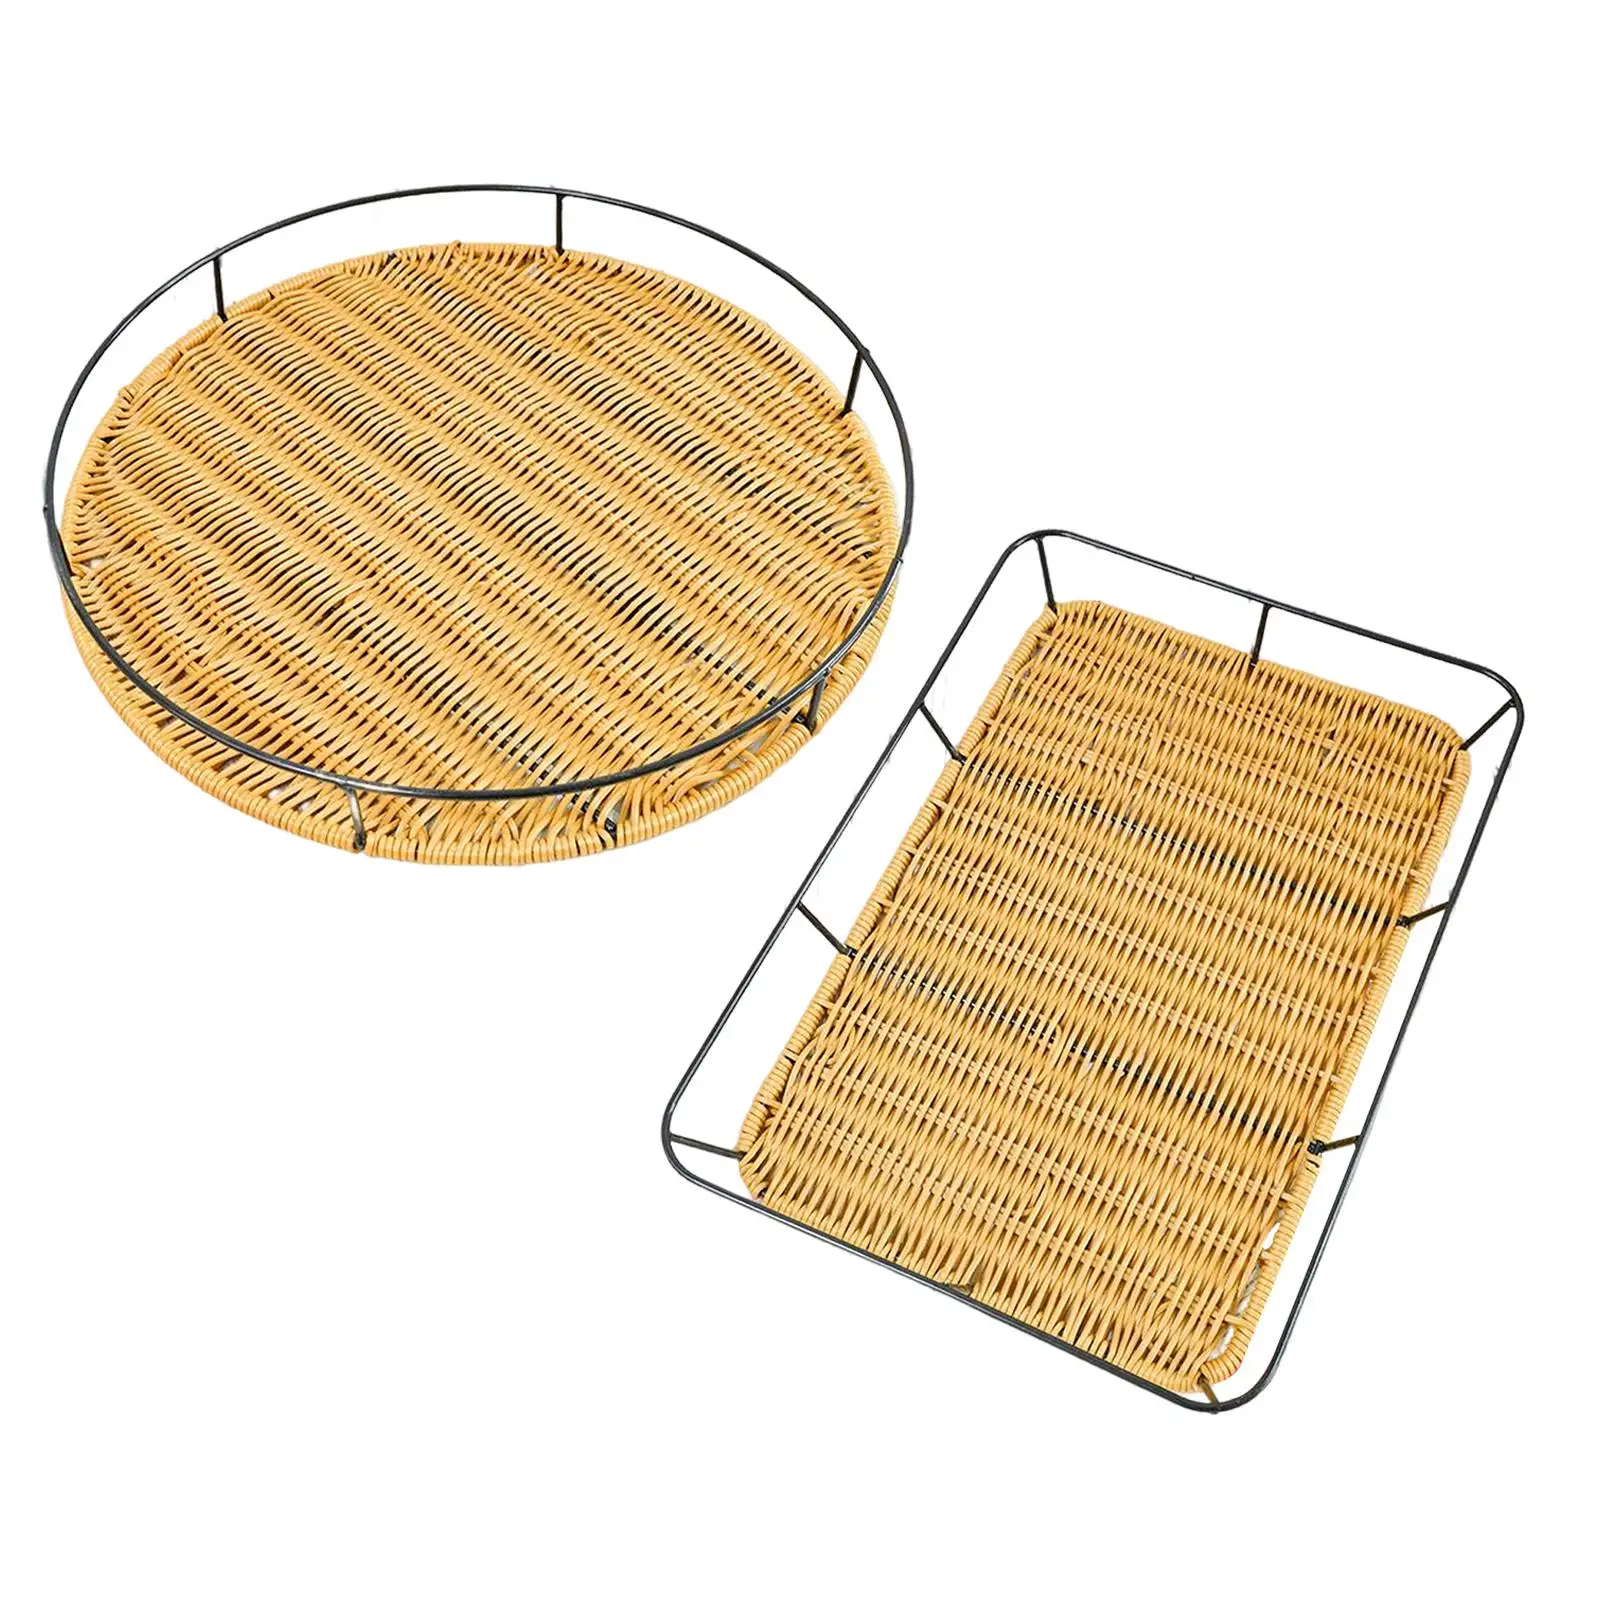 Rattan Tray Home Decor Handmade Fruit Storage Organizer Woven Bread Basket for Dinner Bathroom Party Dining Home Kitchen